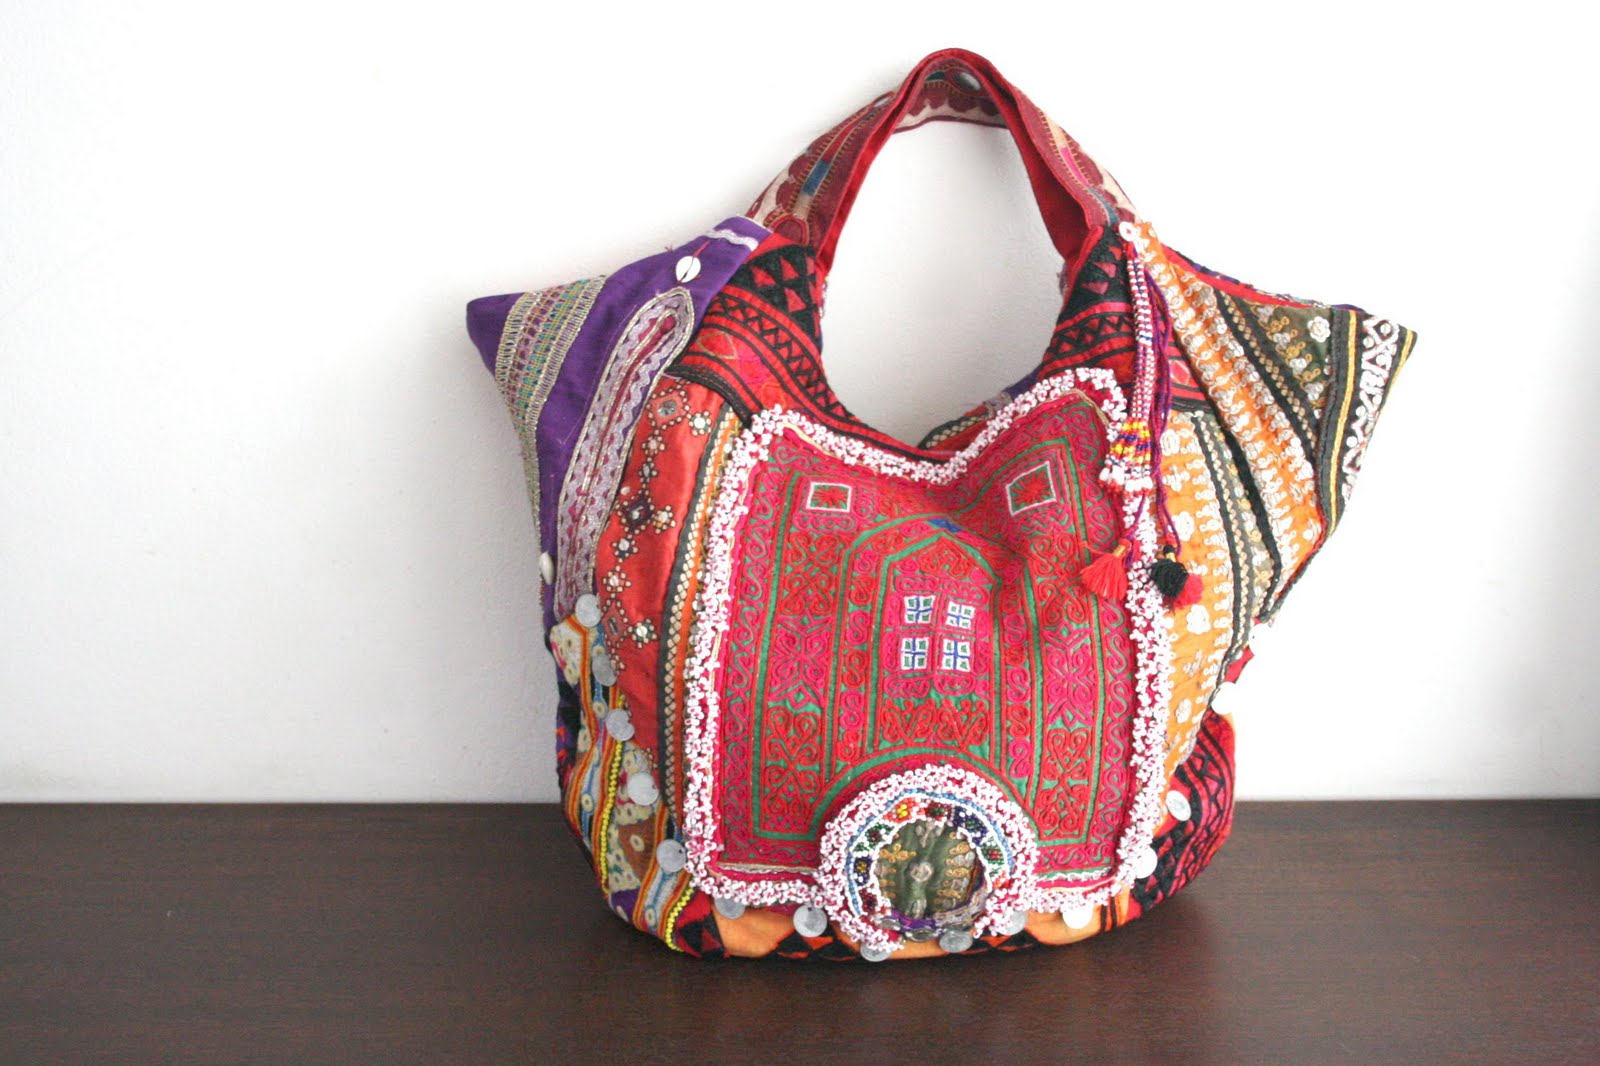 Dazzling Lanna Ethnic bags shop: New patchwork bags from Indian ...